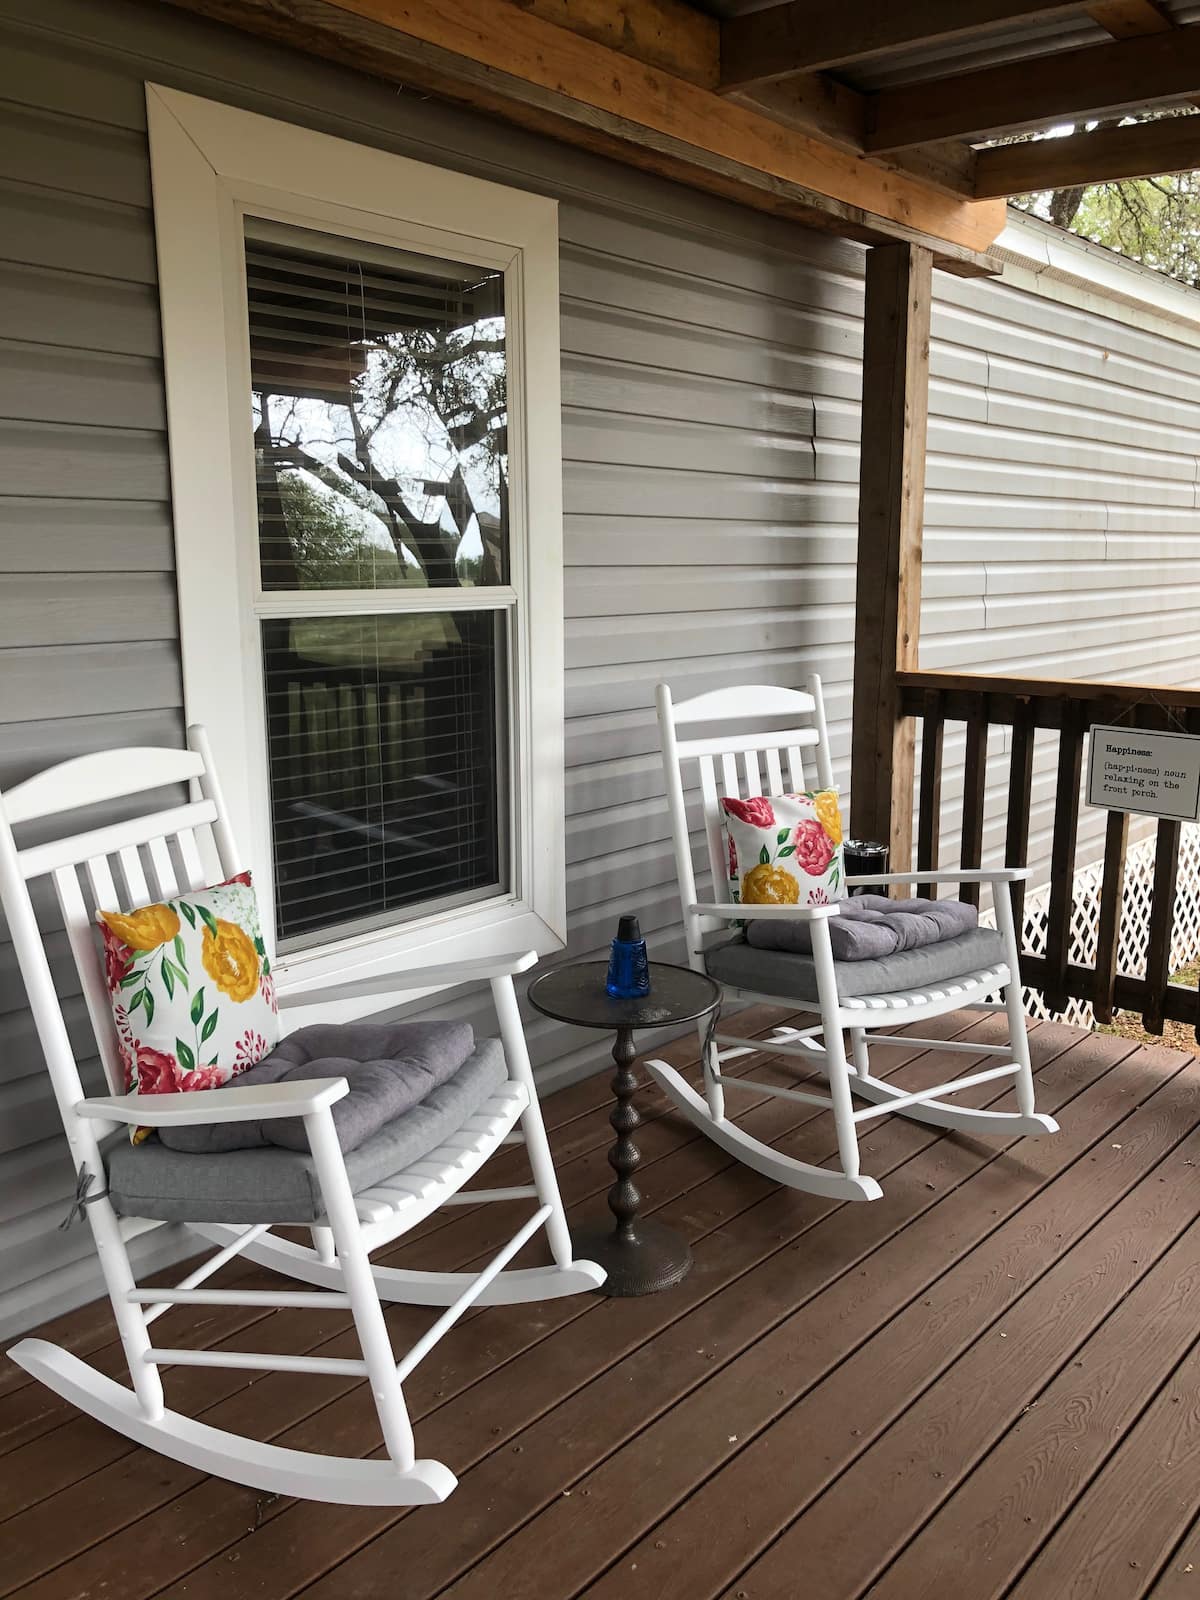 Family Friendly Hill Country Vacation Rentals for families with kids - Casita on the Ranch